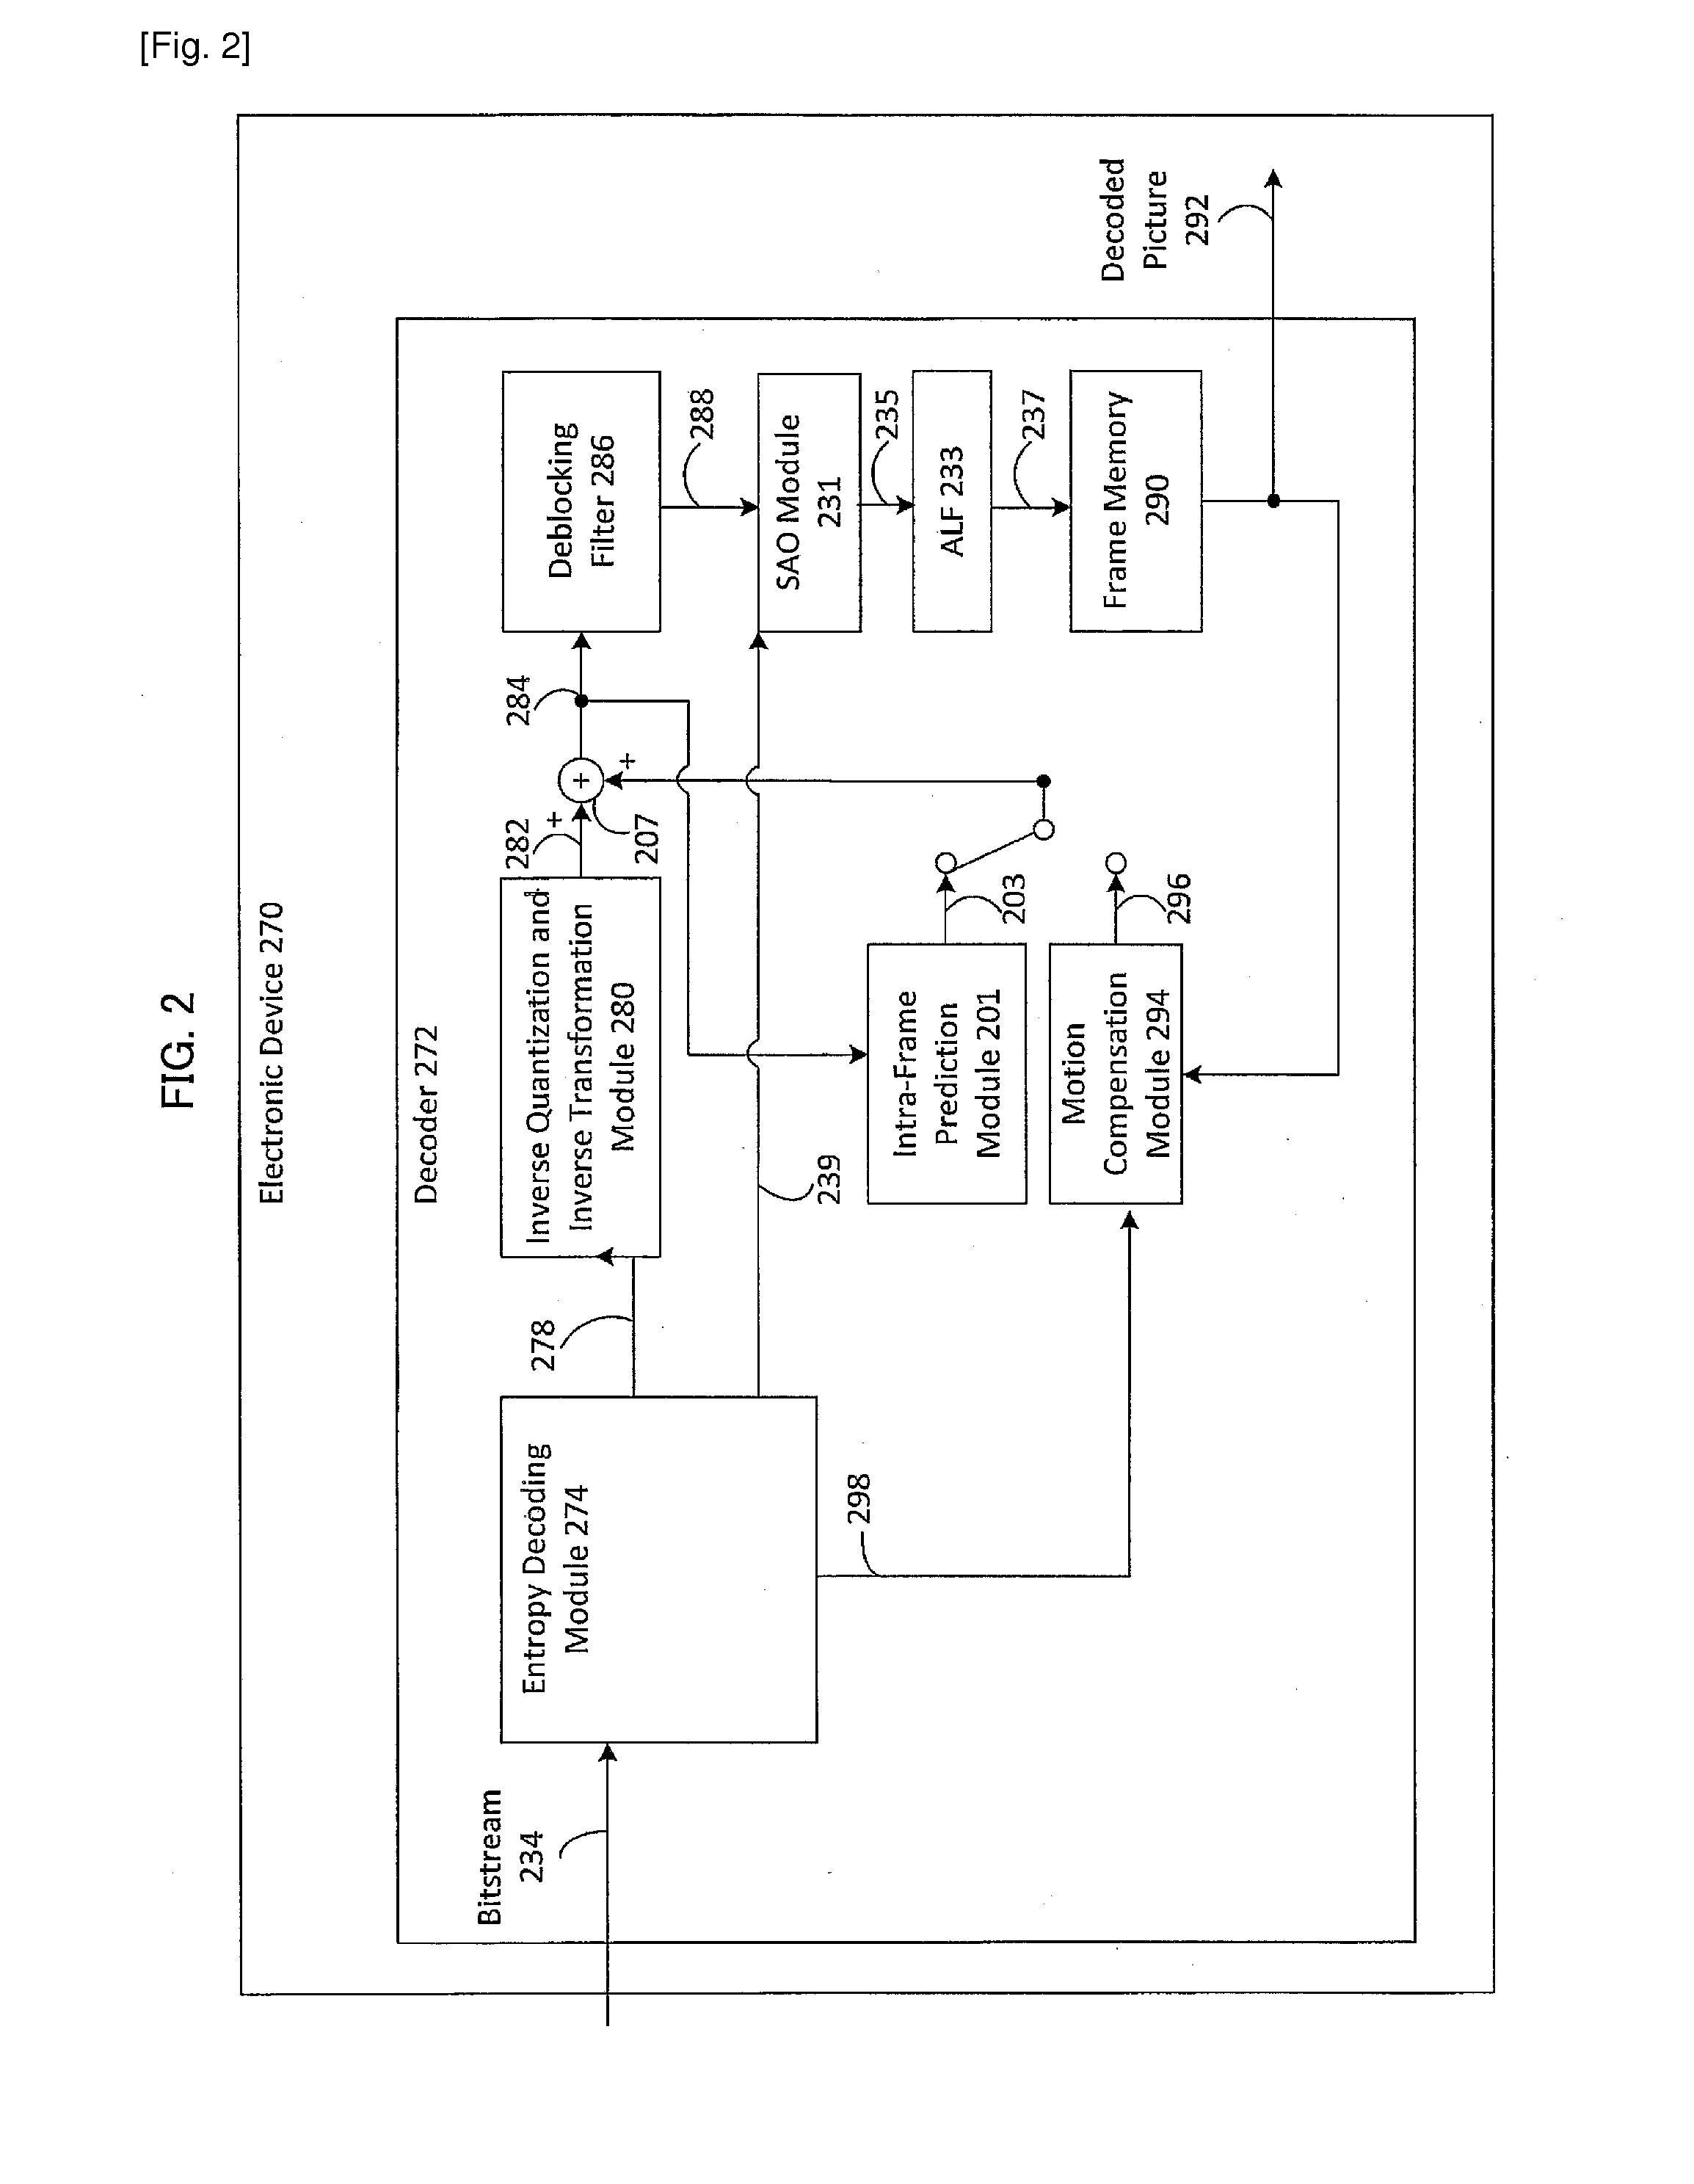 Signaling scalability information in a parameter set